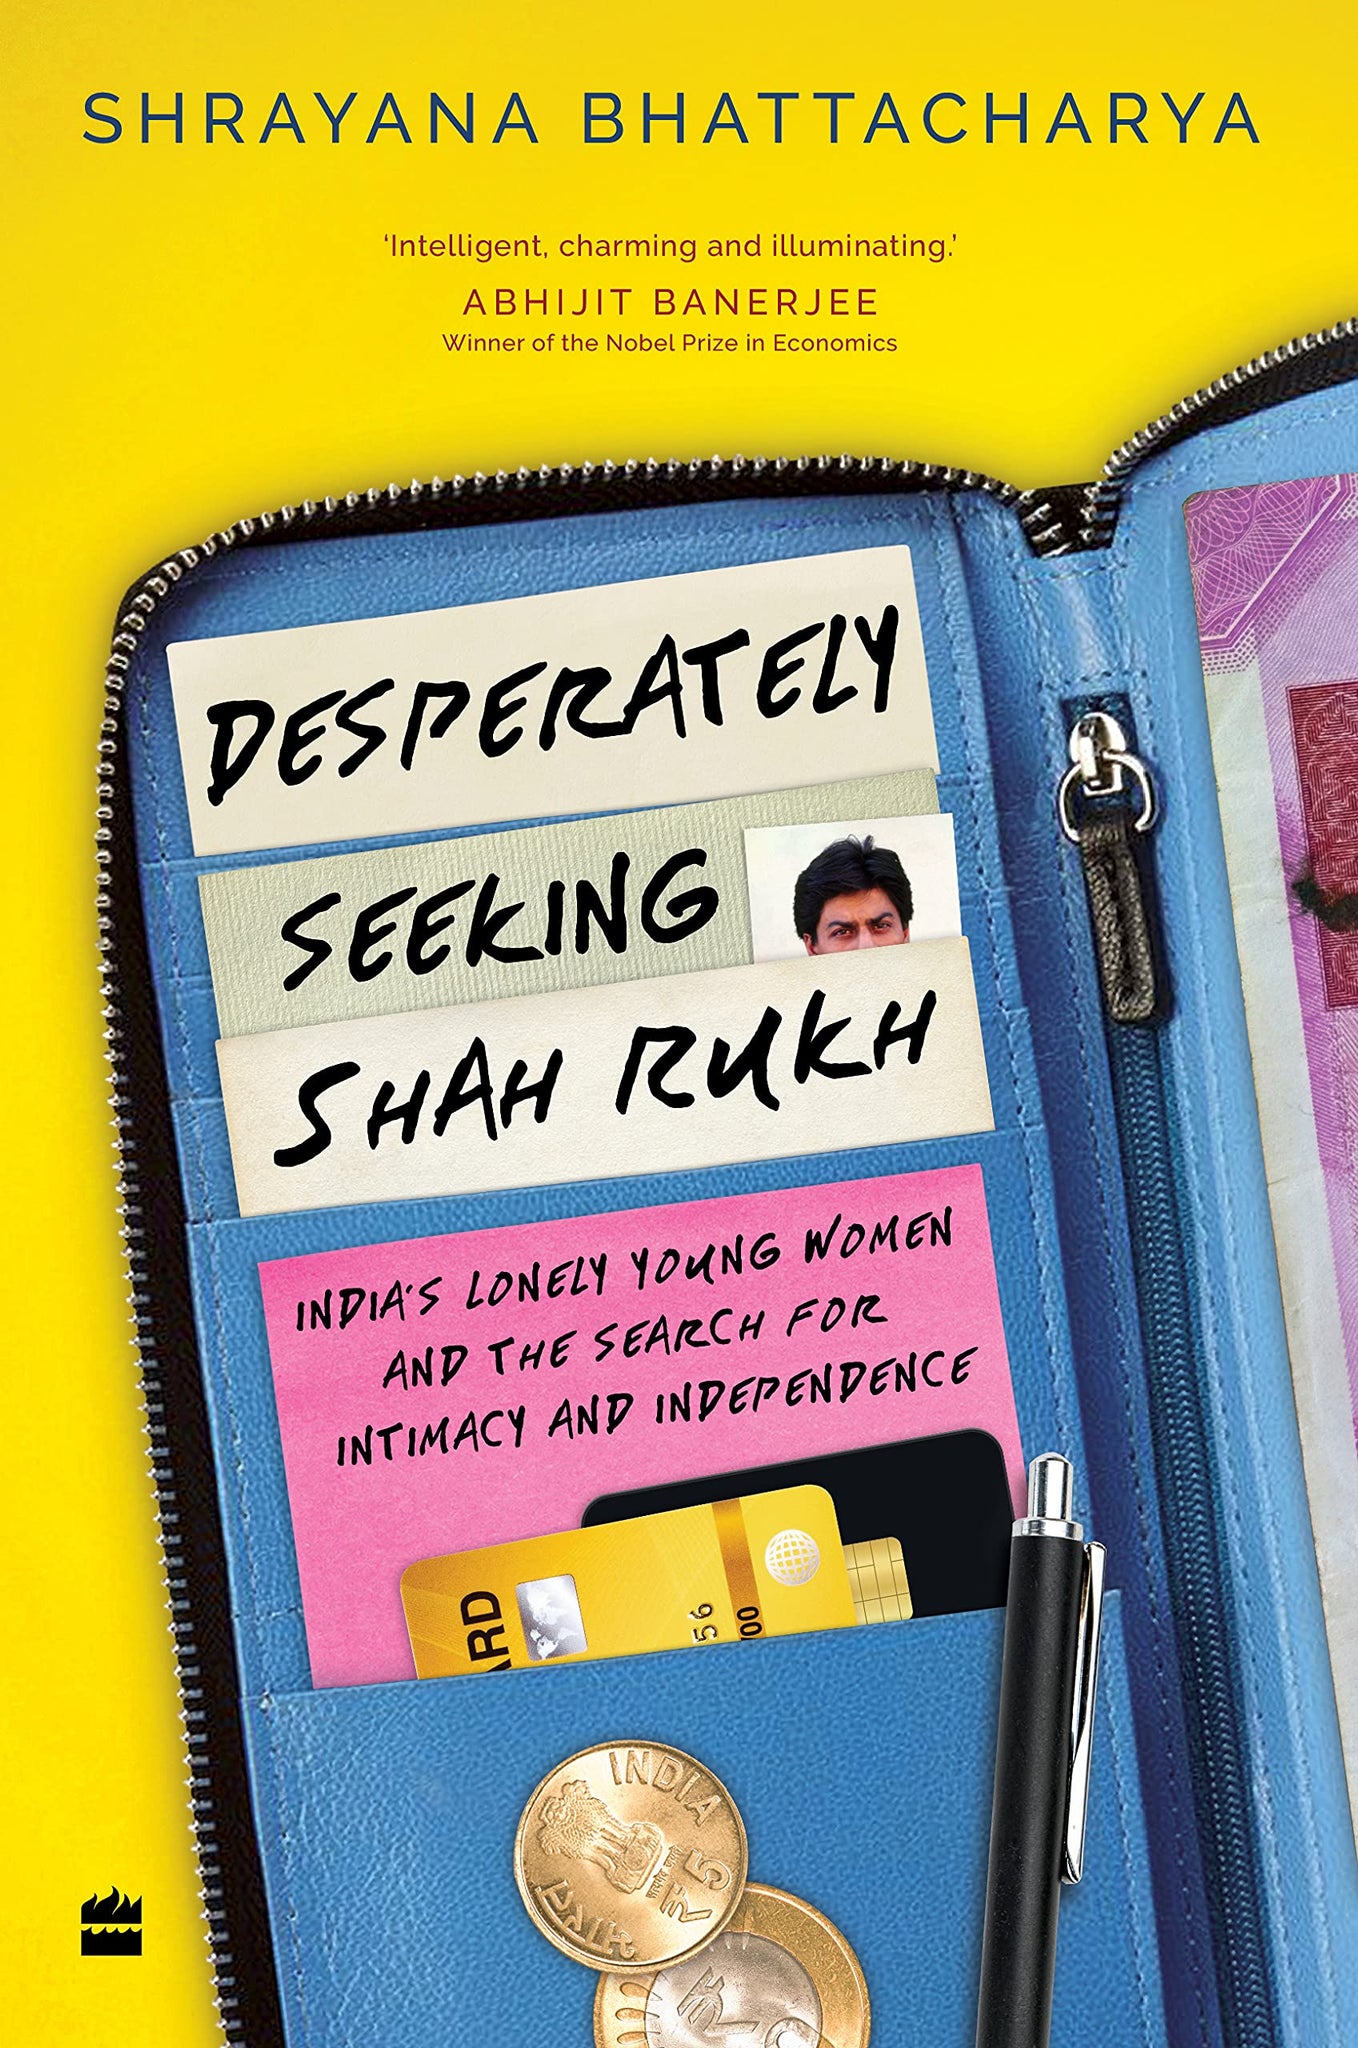 Desperately Seeking Shah Rukh: India's Lonely Young Women And The Search For Intimacy And Independence